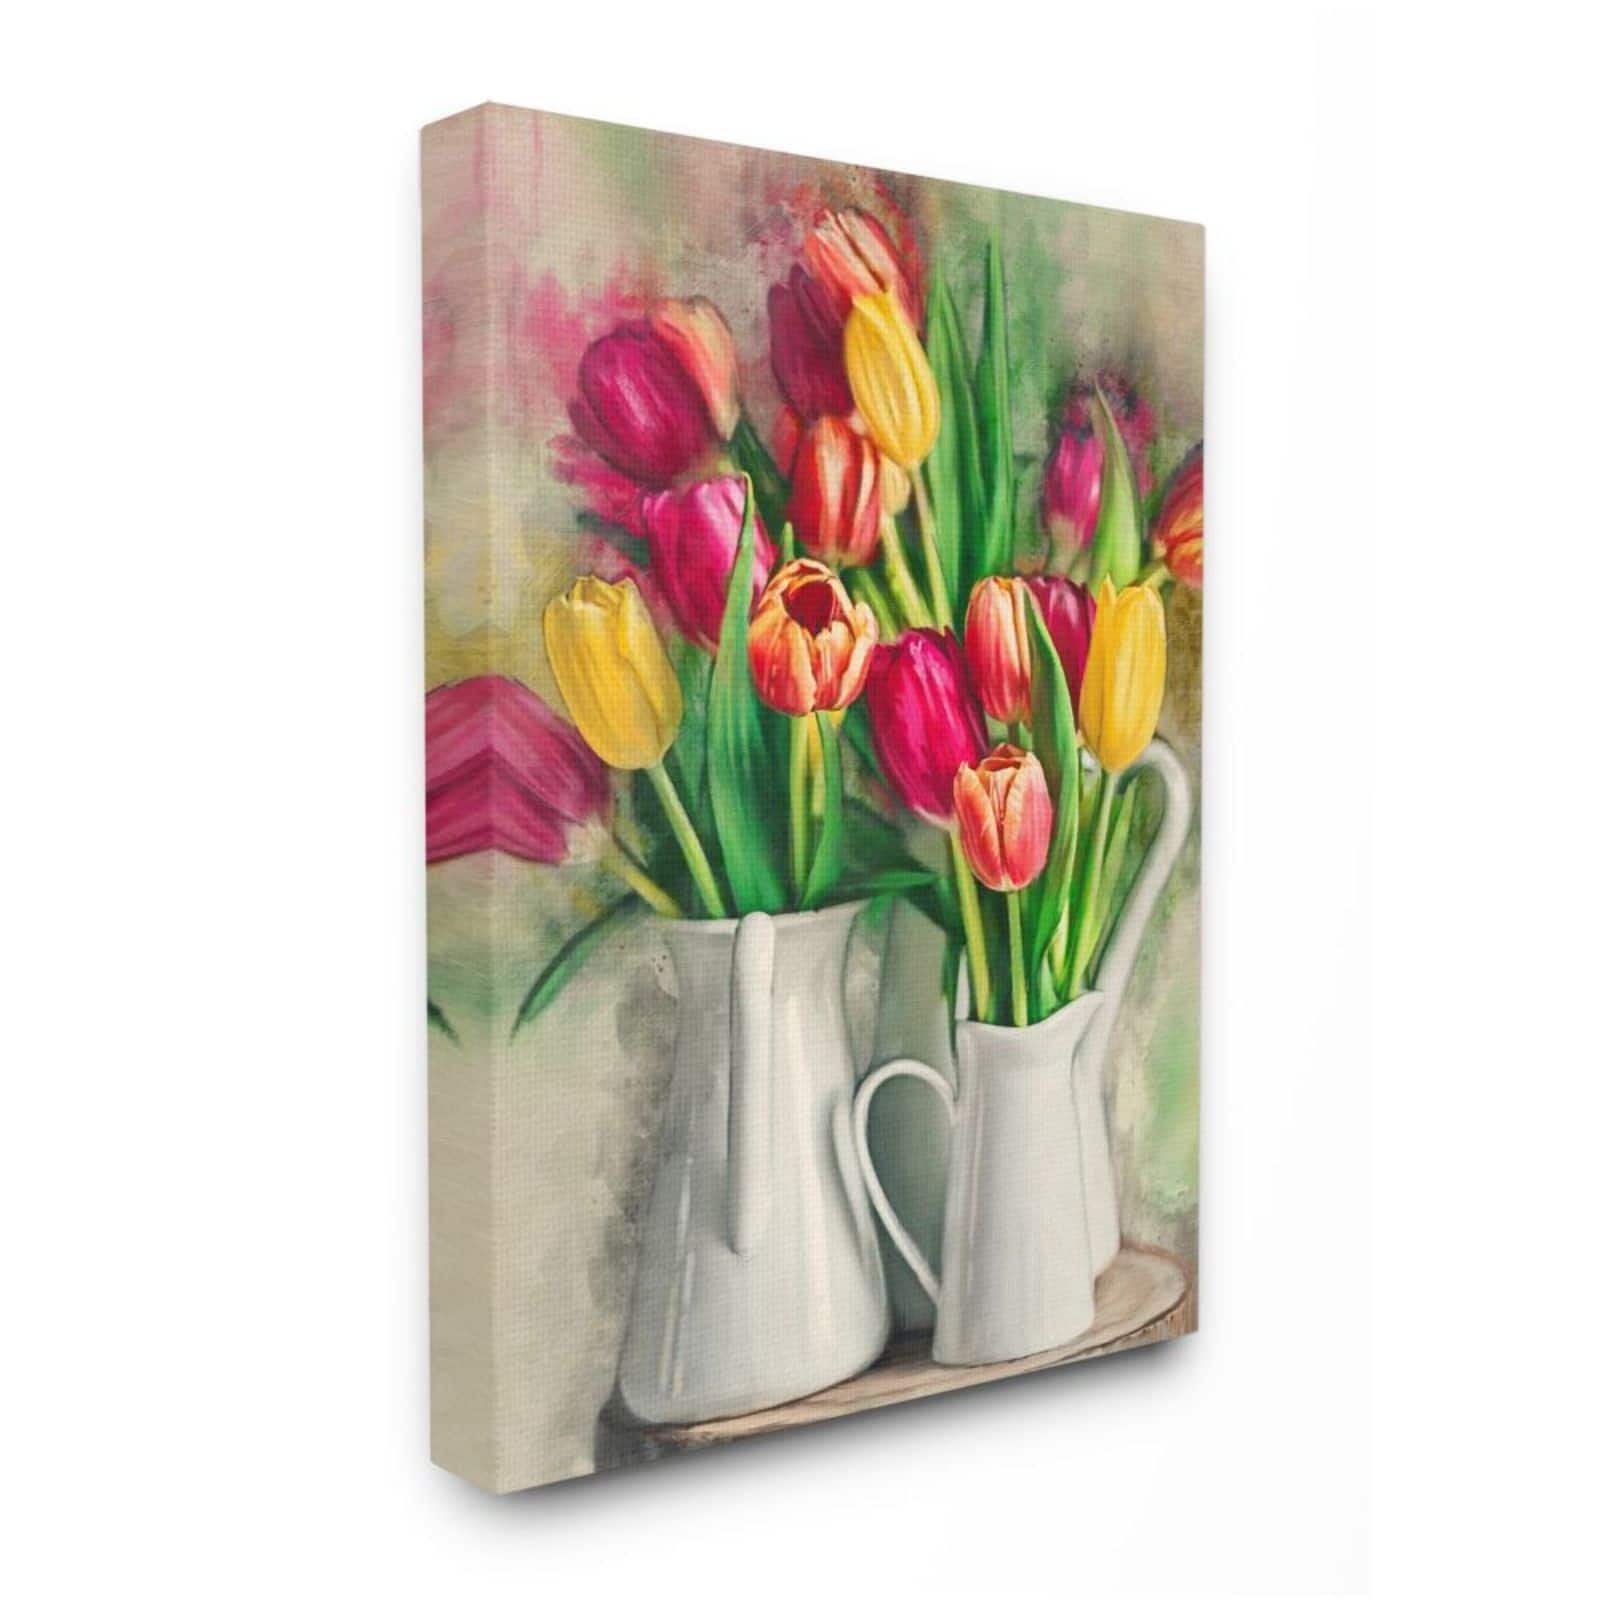 Stupell Industries Colorful Tulip Assortments in Farm Pitchers Wall Accent